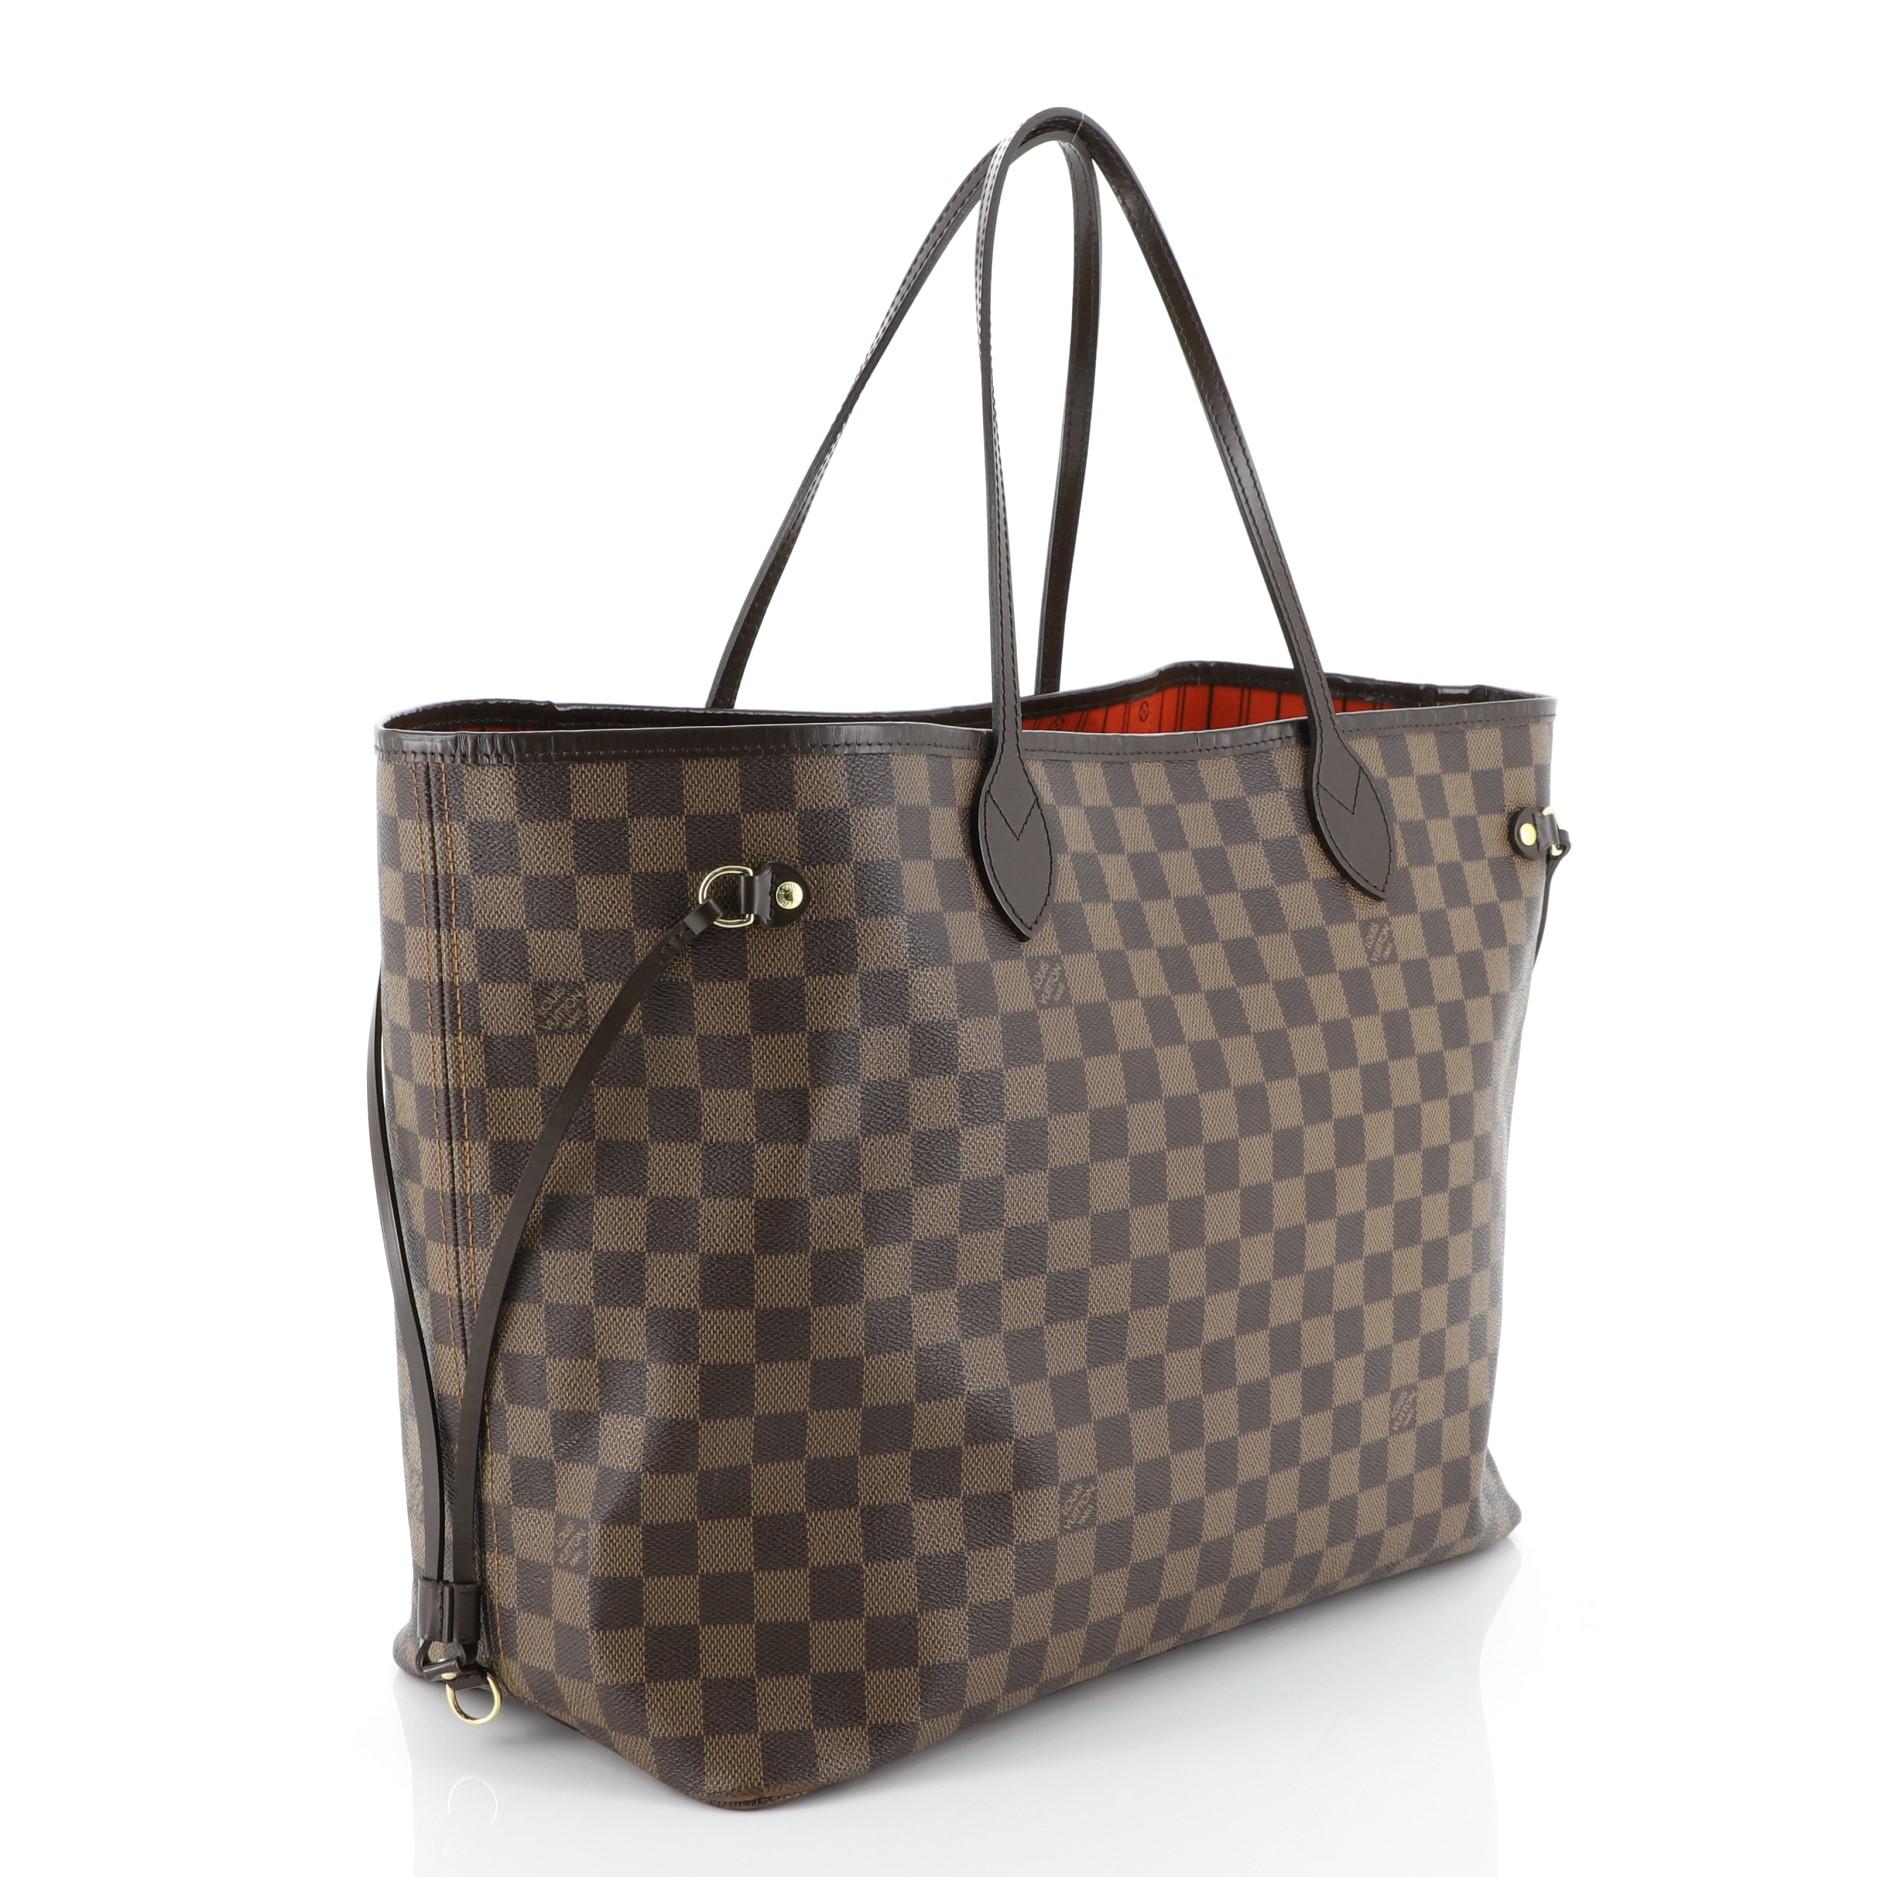 This Louis Vuitton Neverfull Tote Damier GM is a classic piece launched in 2007. Crafted in damier ebene coated canvas, it features dual slim handles, side laces, and gold-tone hardware. Its wide open top showcases a red fabric interior with side